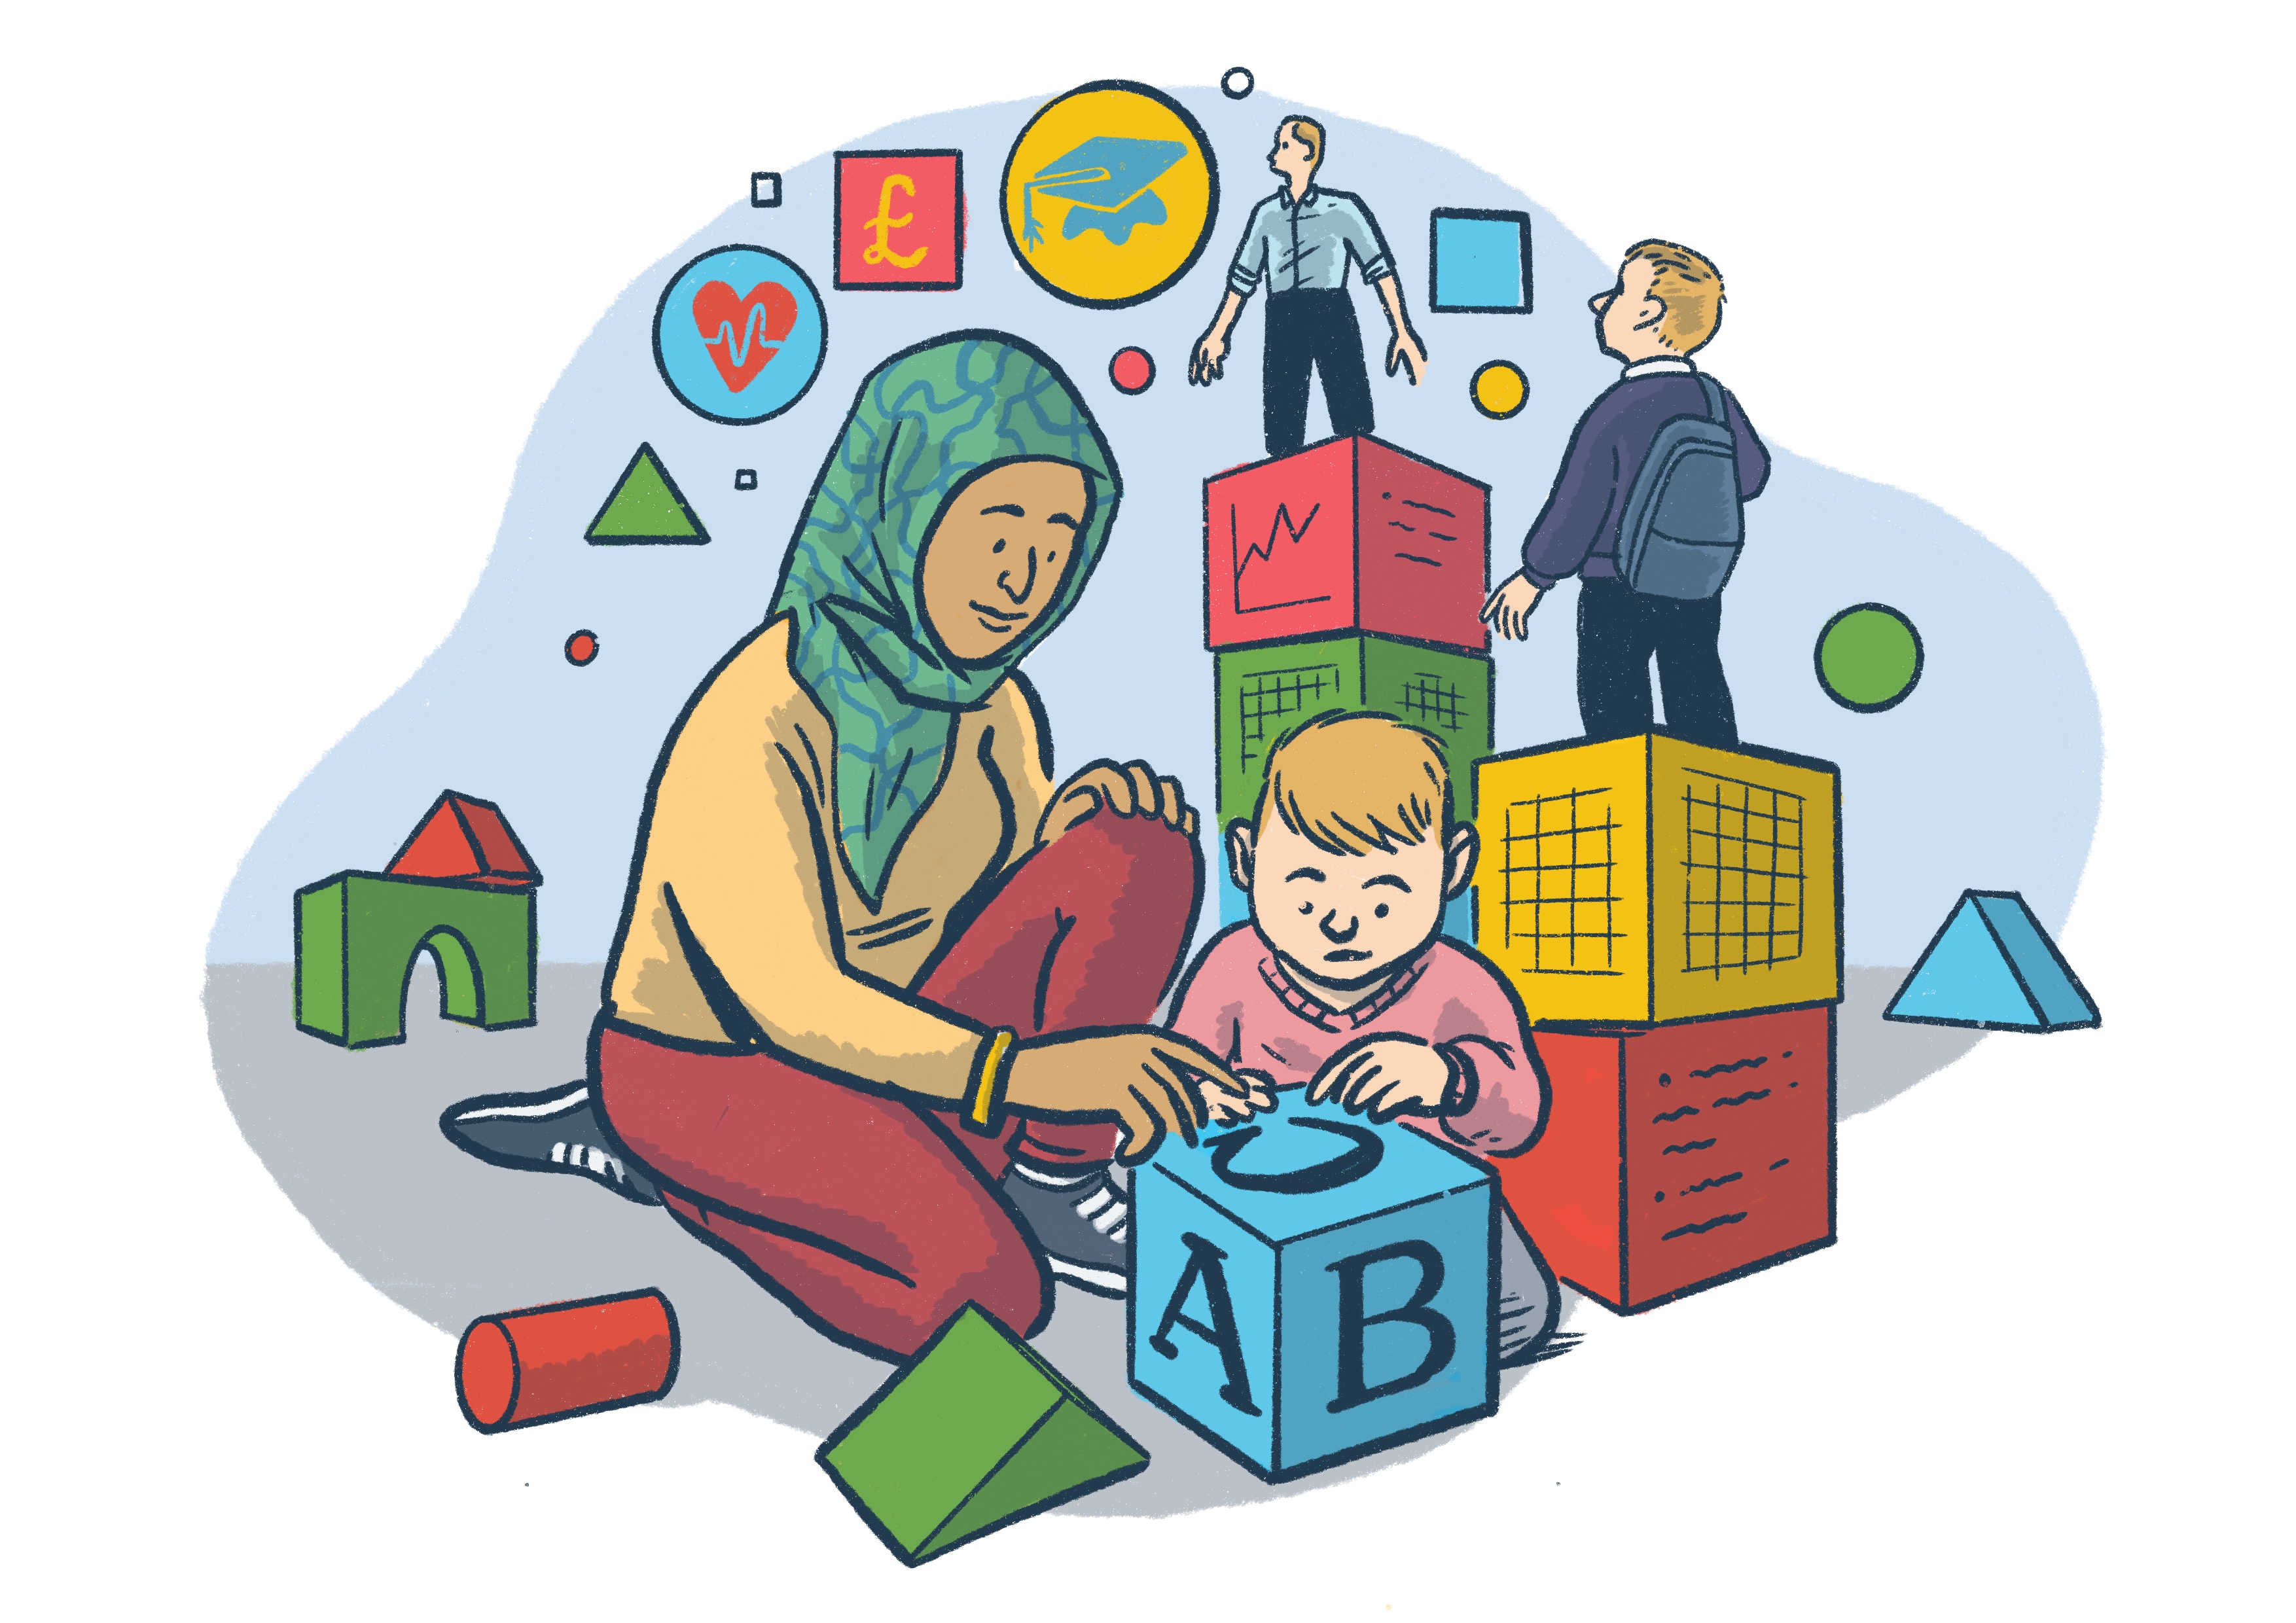 Illustration. A teacher helps a very young child playing with colourful building blocks. In the background, the child is shown at an older age, and further in the distance, as a young adult, looking at symbols of education, income,& health